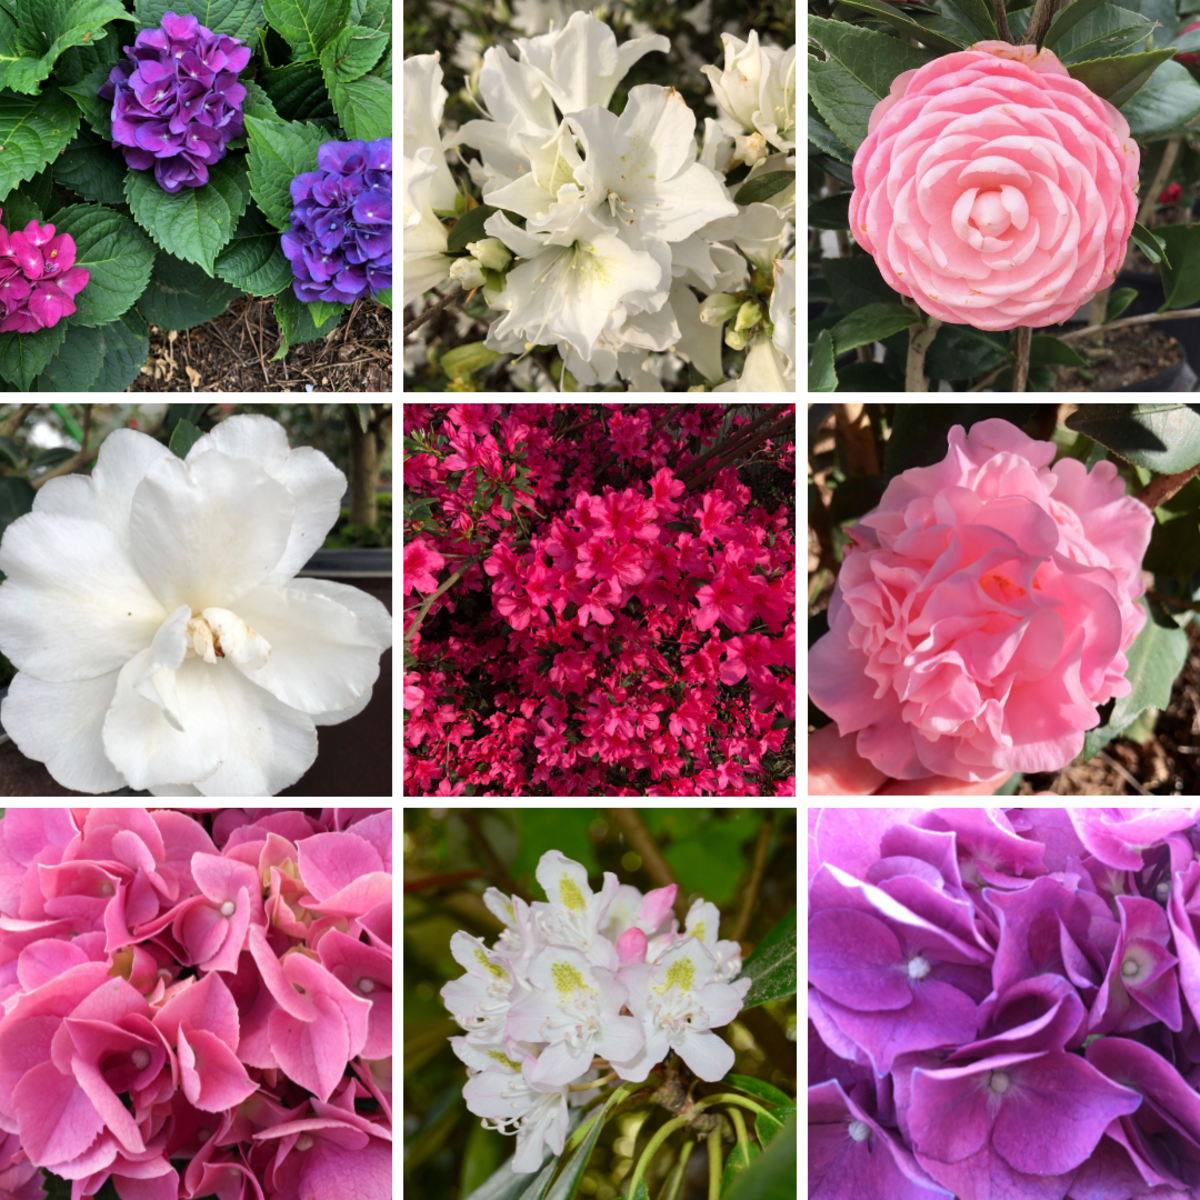 These are just a few of the gorgeous flowering shrubs that need shade. Top row: hydrangea, azalea, camellia japonica. Middle row: camellia sasanqua, azalea, camellia. Bottom row: hydrangea, rhododendron, hydrangea.